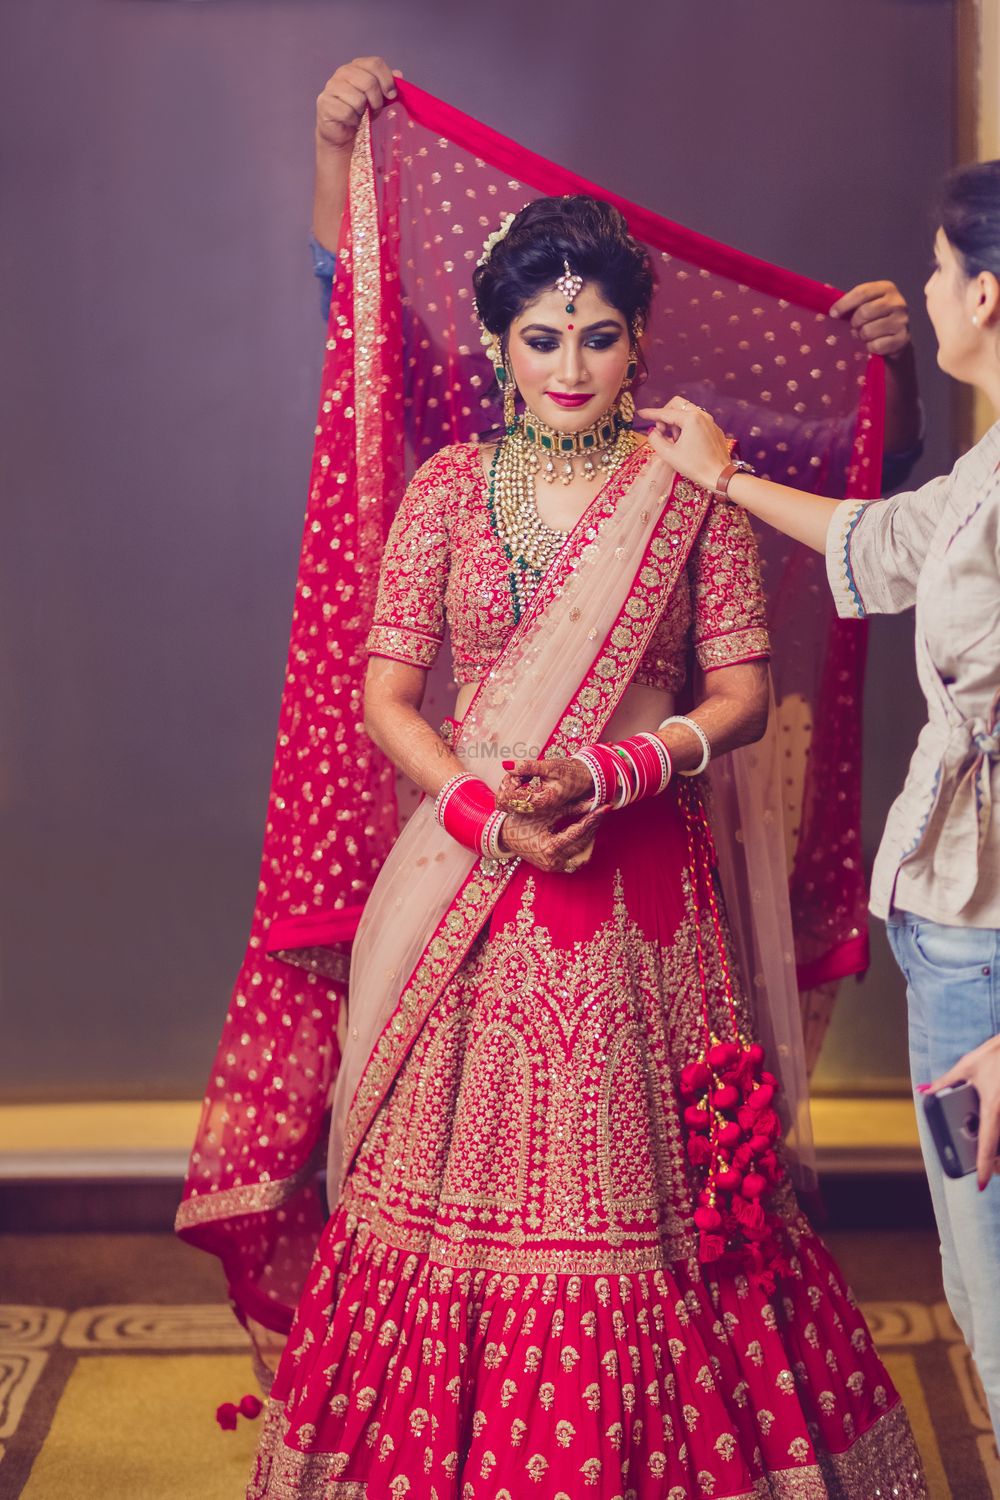 Photo From North Indian Bride_ Shikha on her wedding day - By Nivritti Chandra